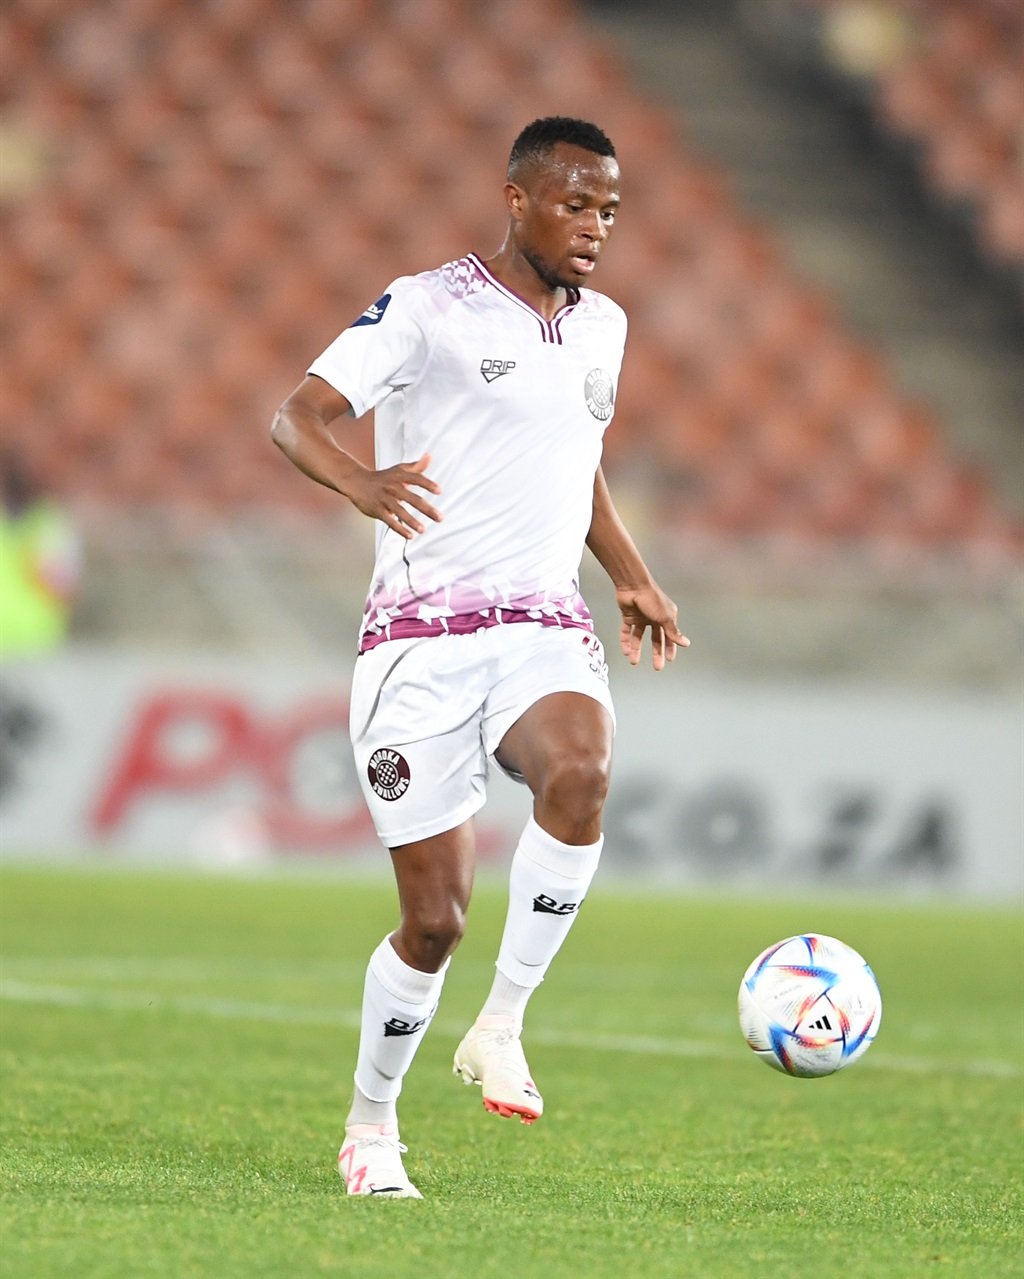 POLOKWANE, SOUTH AFRICA - AUGUST 16: Bongani Sam of Moroka Swallows during the DStv Premiership match between Sekhukhune United and Moroka Swallows at Peter Mokaba Stadium on August 16, 2023 in Polokwane, South Africa. (Photo by Philip Maeta/Gallo Images)